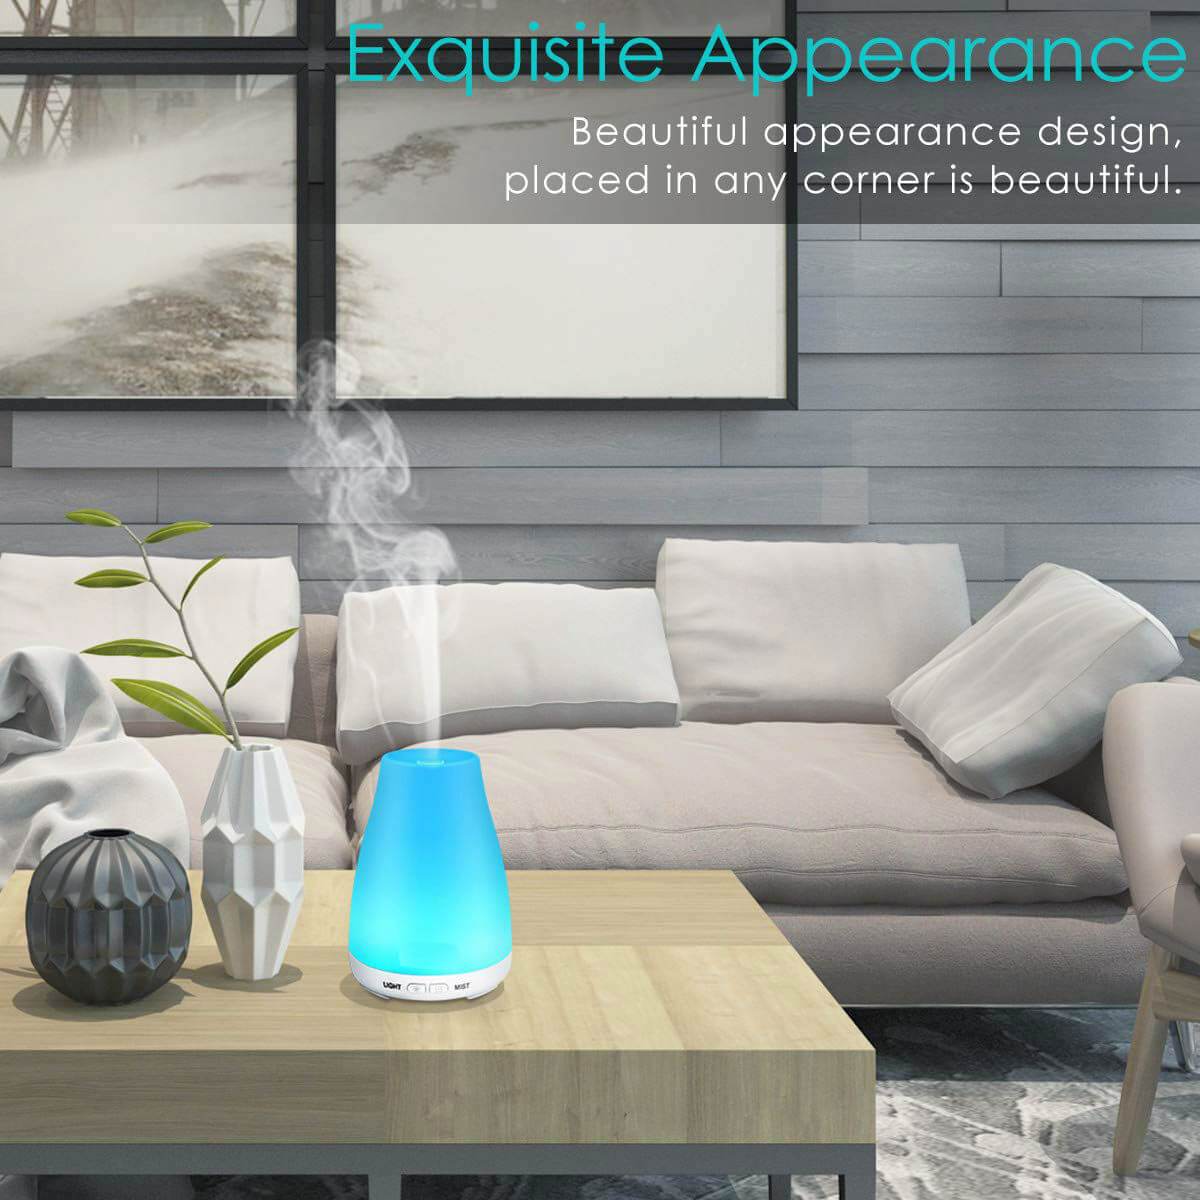 Essential Oil Diffuser for Sleep Colds Cough Headache Humidifier - Blue Light Blocking Glasses Computer Gaming Reading Anti Glare Reduce Eye Strain Screen Glasses by Teddith